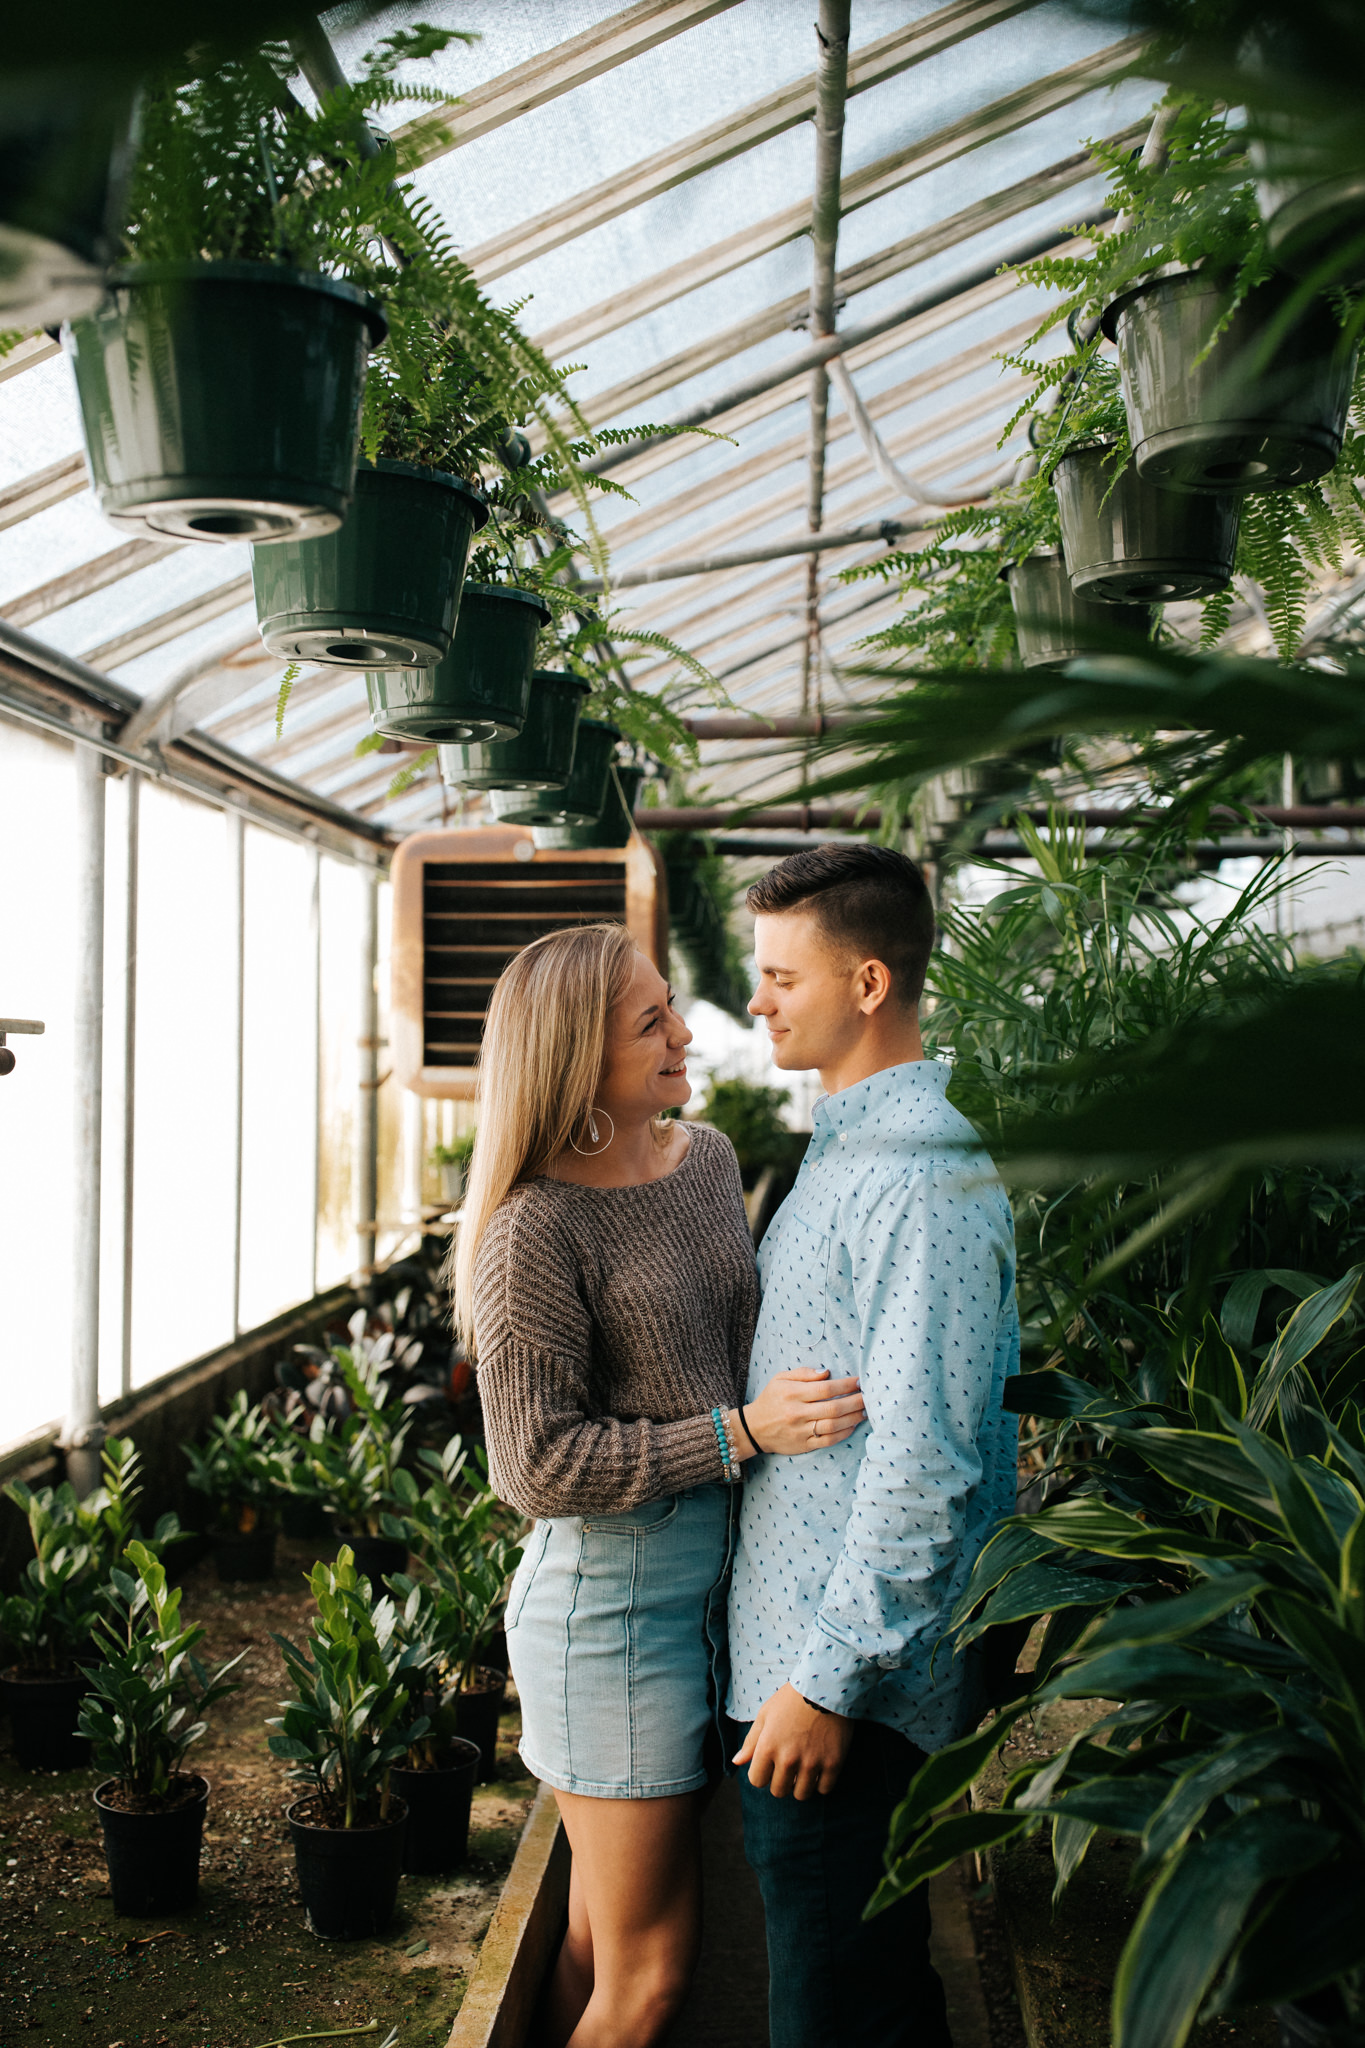 memphis-engagement-photographer-thewarmtharoundyou-greenhouse-engagement-pictures (2 of 118).jpg